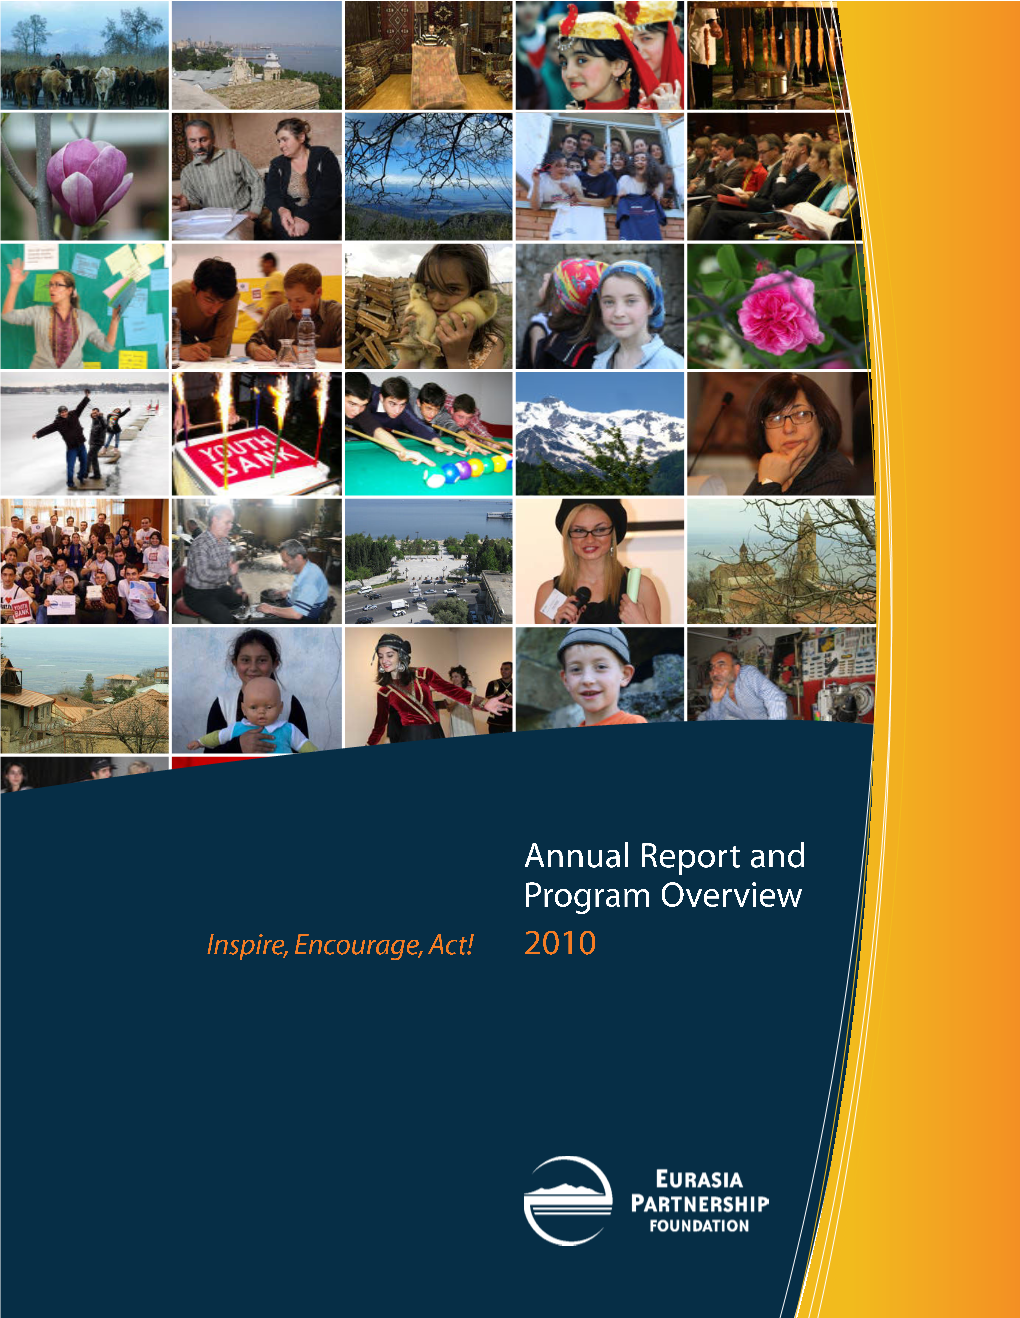 Annual Report 2010 1 Mandates and Programs